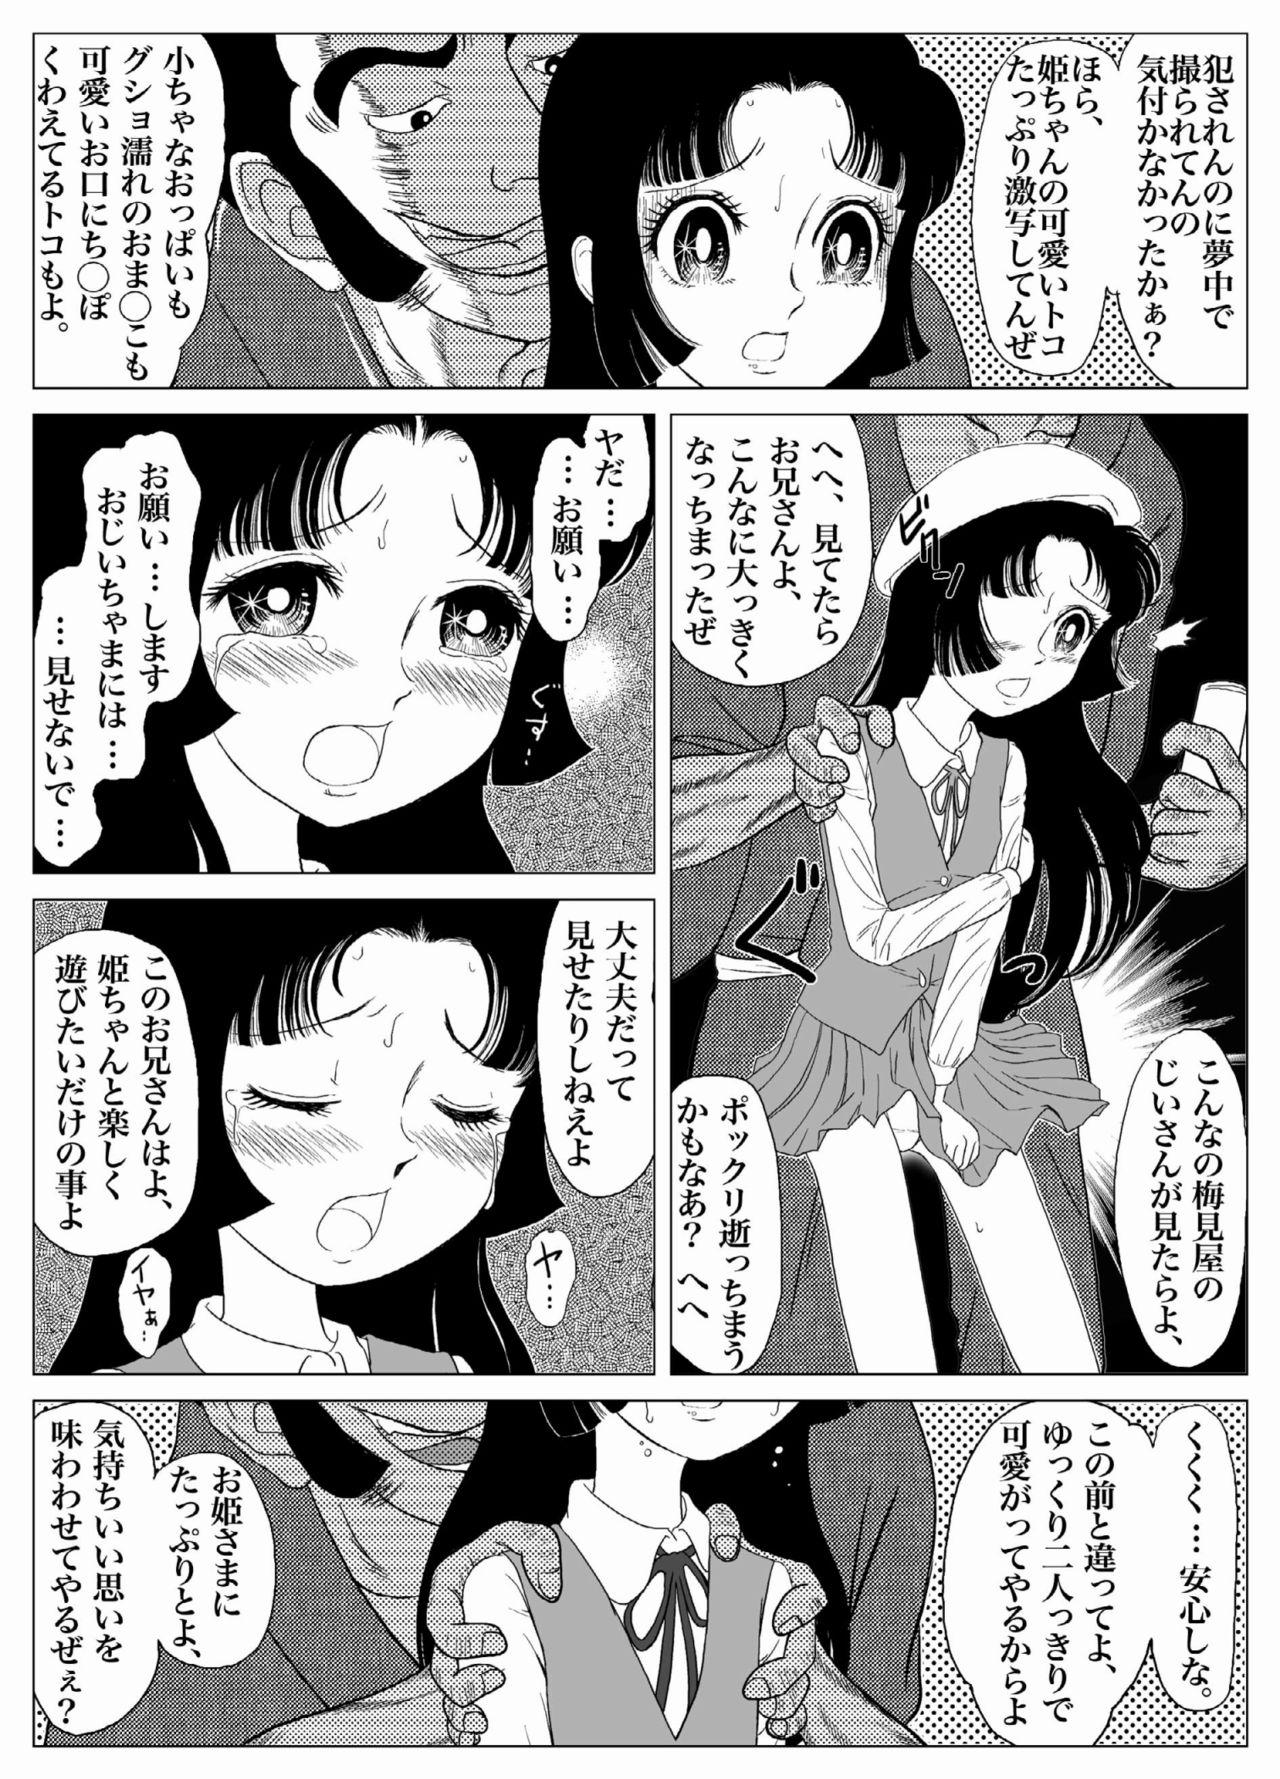 Sixtynine Uwasa no Goreijo - HIMEKO Still in the WRONG World Vip - Page 4